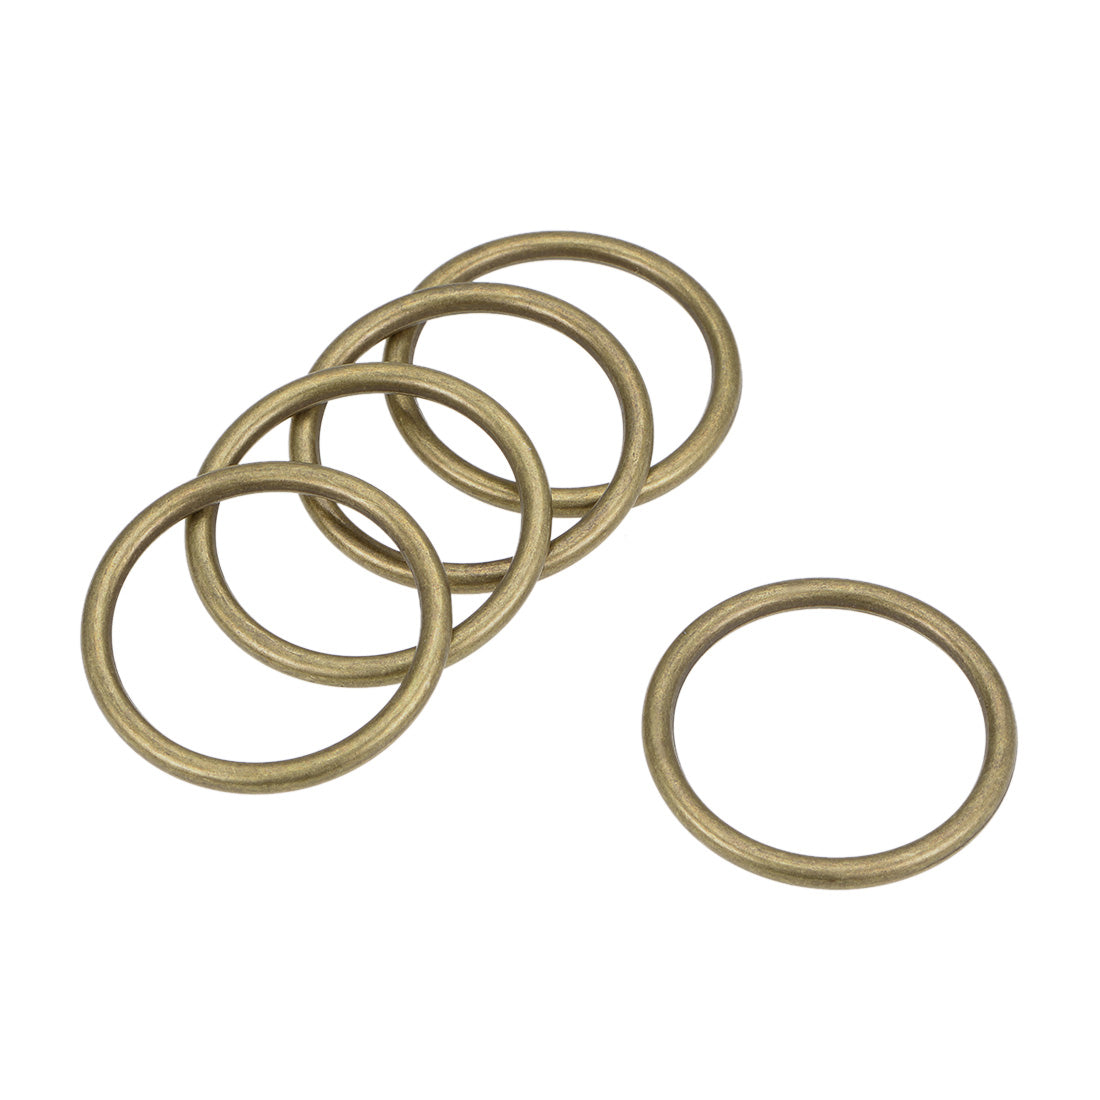 uxcell Uxcell O Ring Buckle 30mm(1.2") ID 3mm Thickness Zinc Alloy O-Rings for Hardware Bags Belts Craft DIY Accessories, Bronze Tone 5pcs